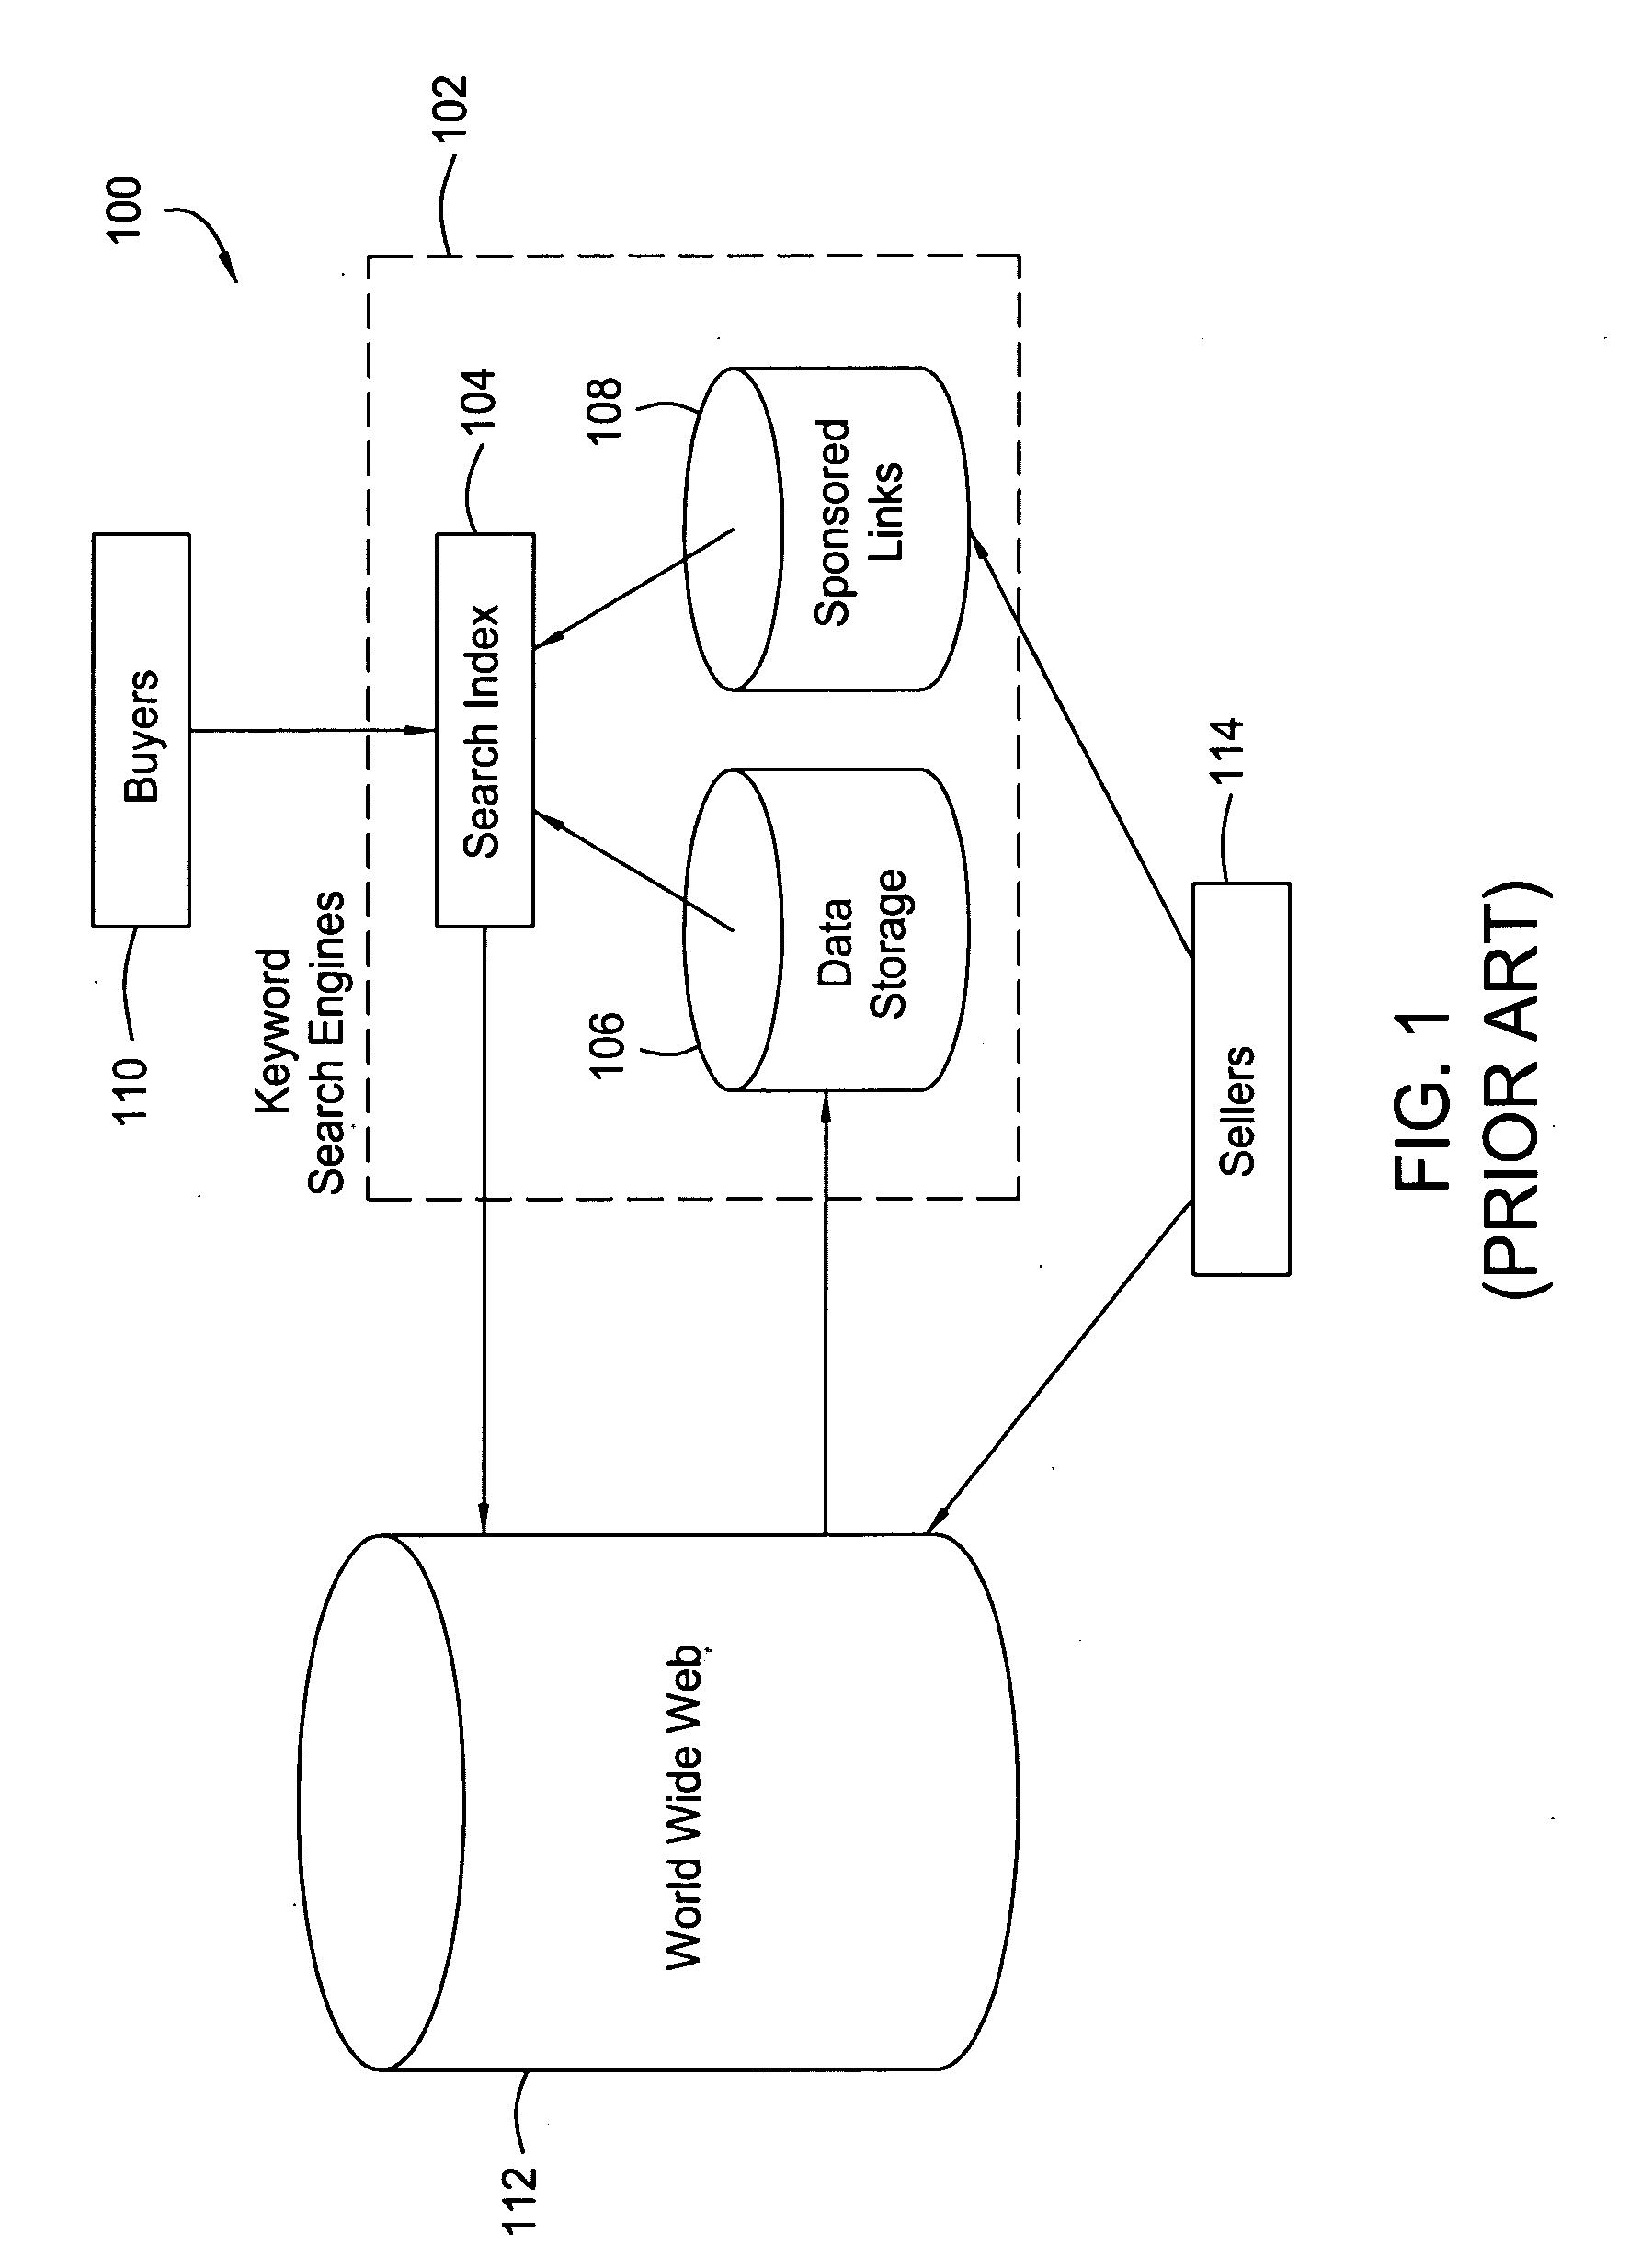 System, method and apparatus for electronically searching for an item